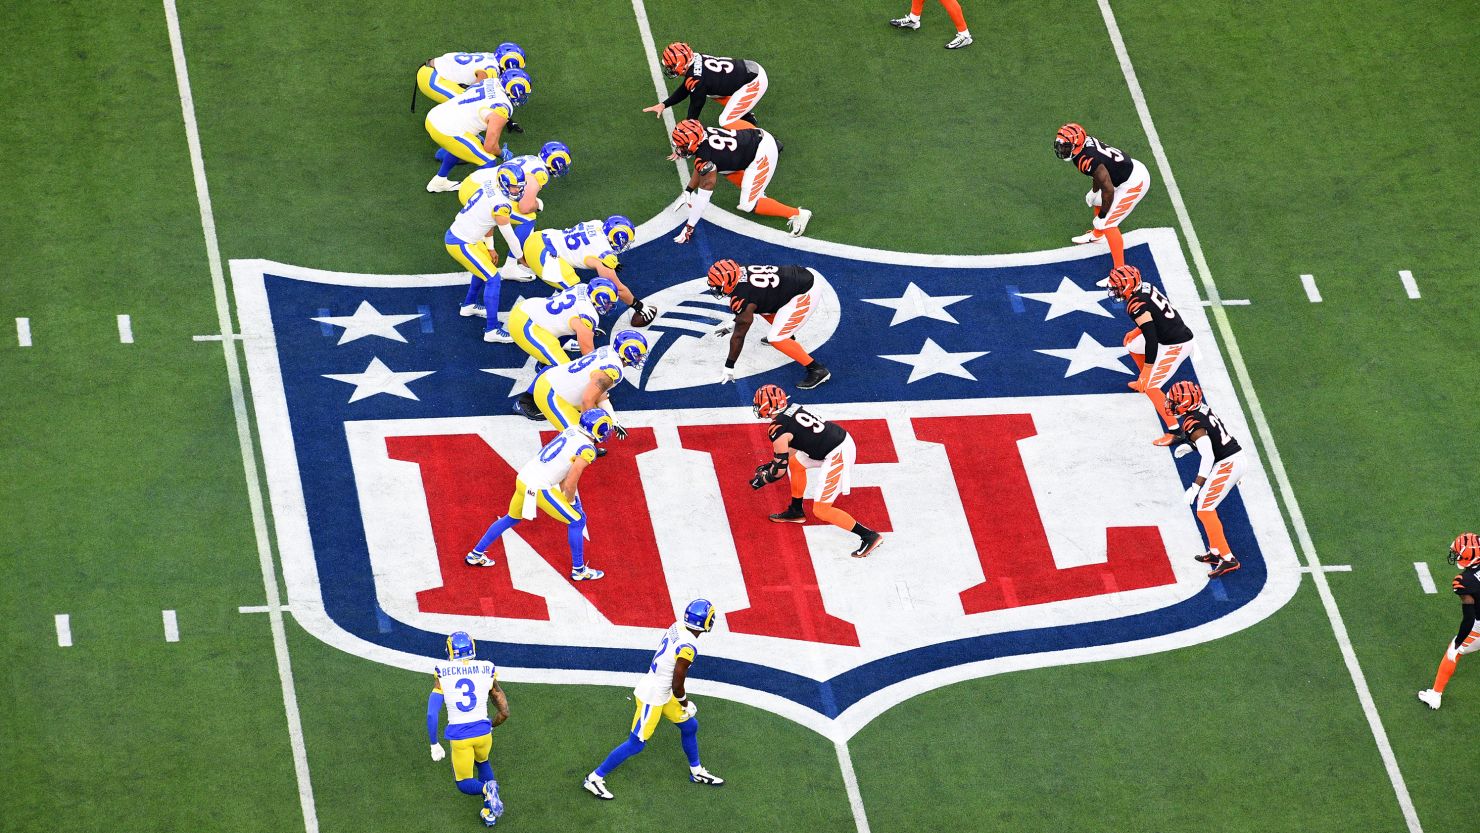 NFL season: A glossary of terms and football jargon you'll need to fit in